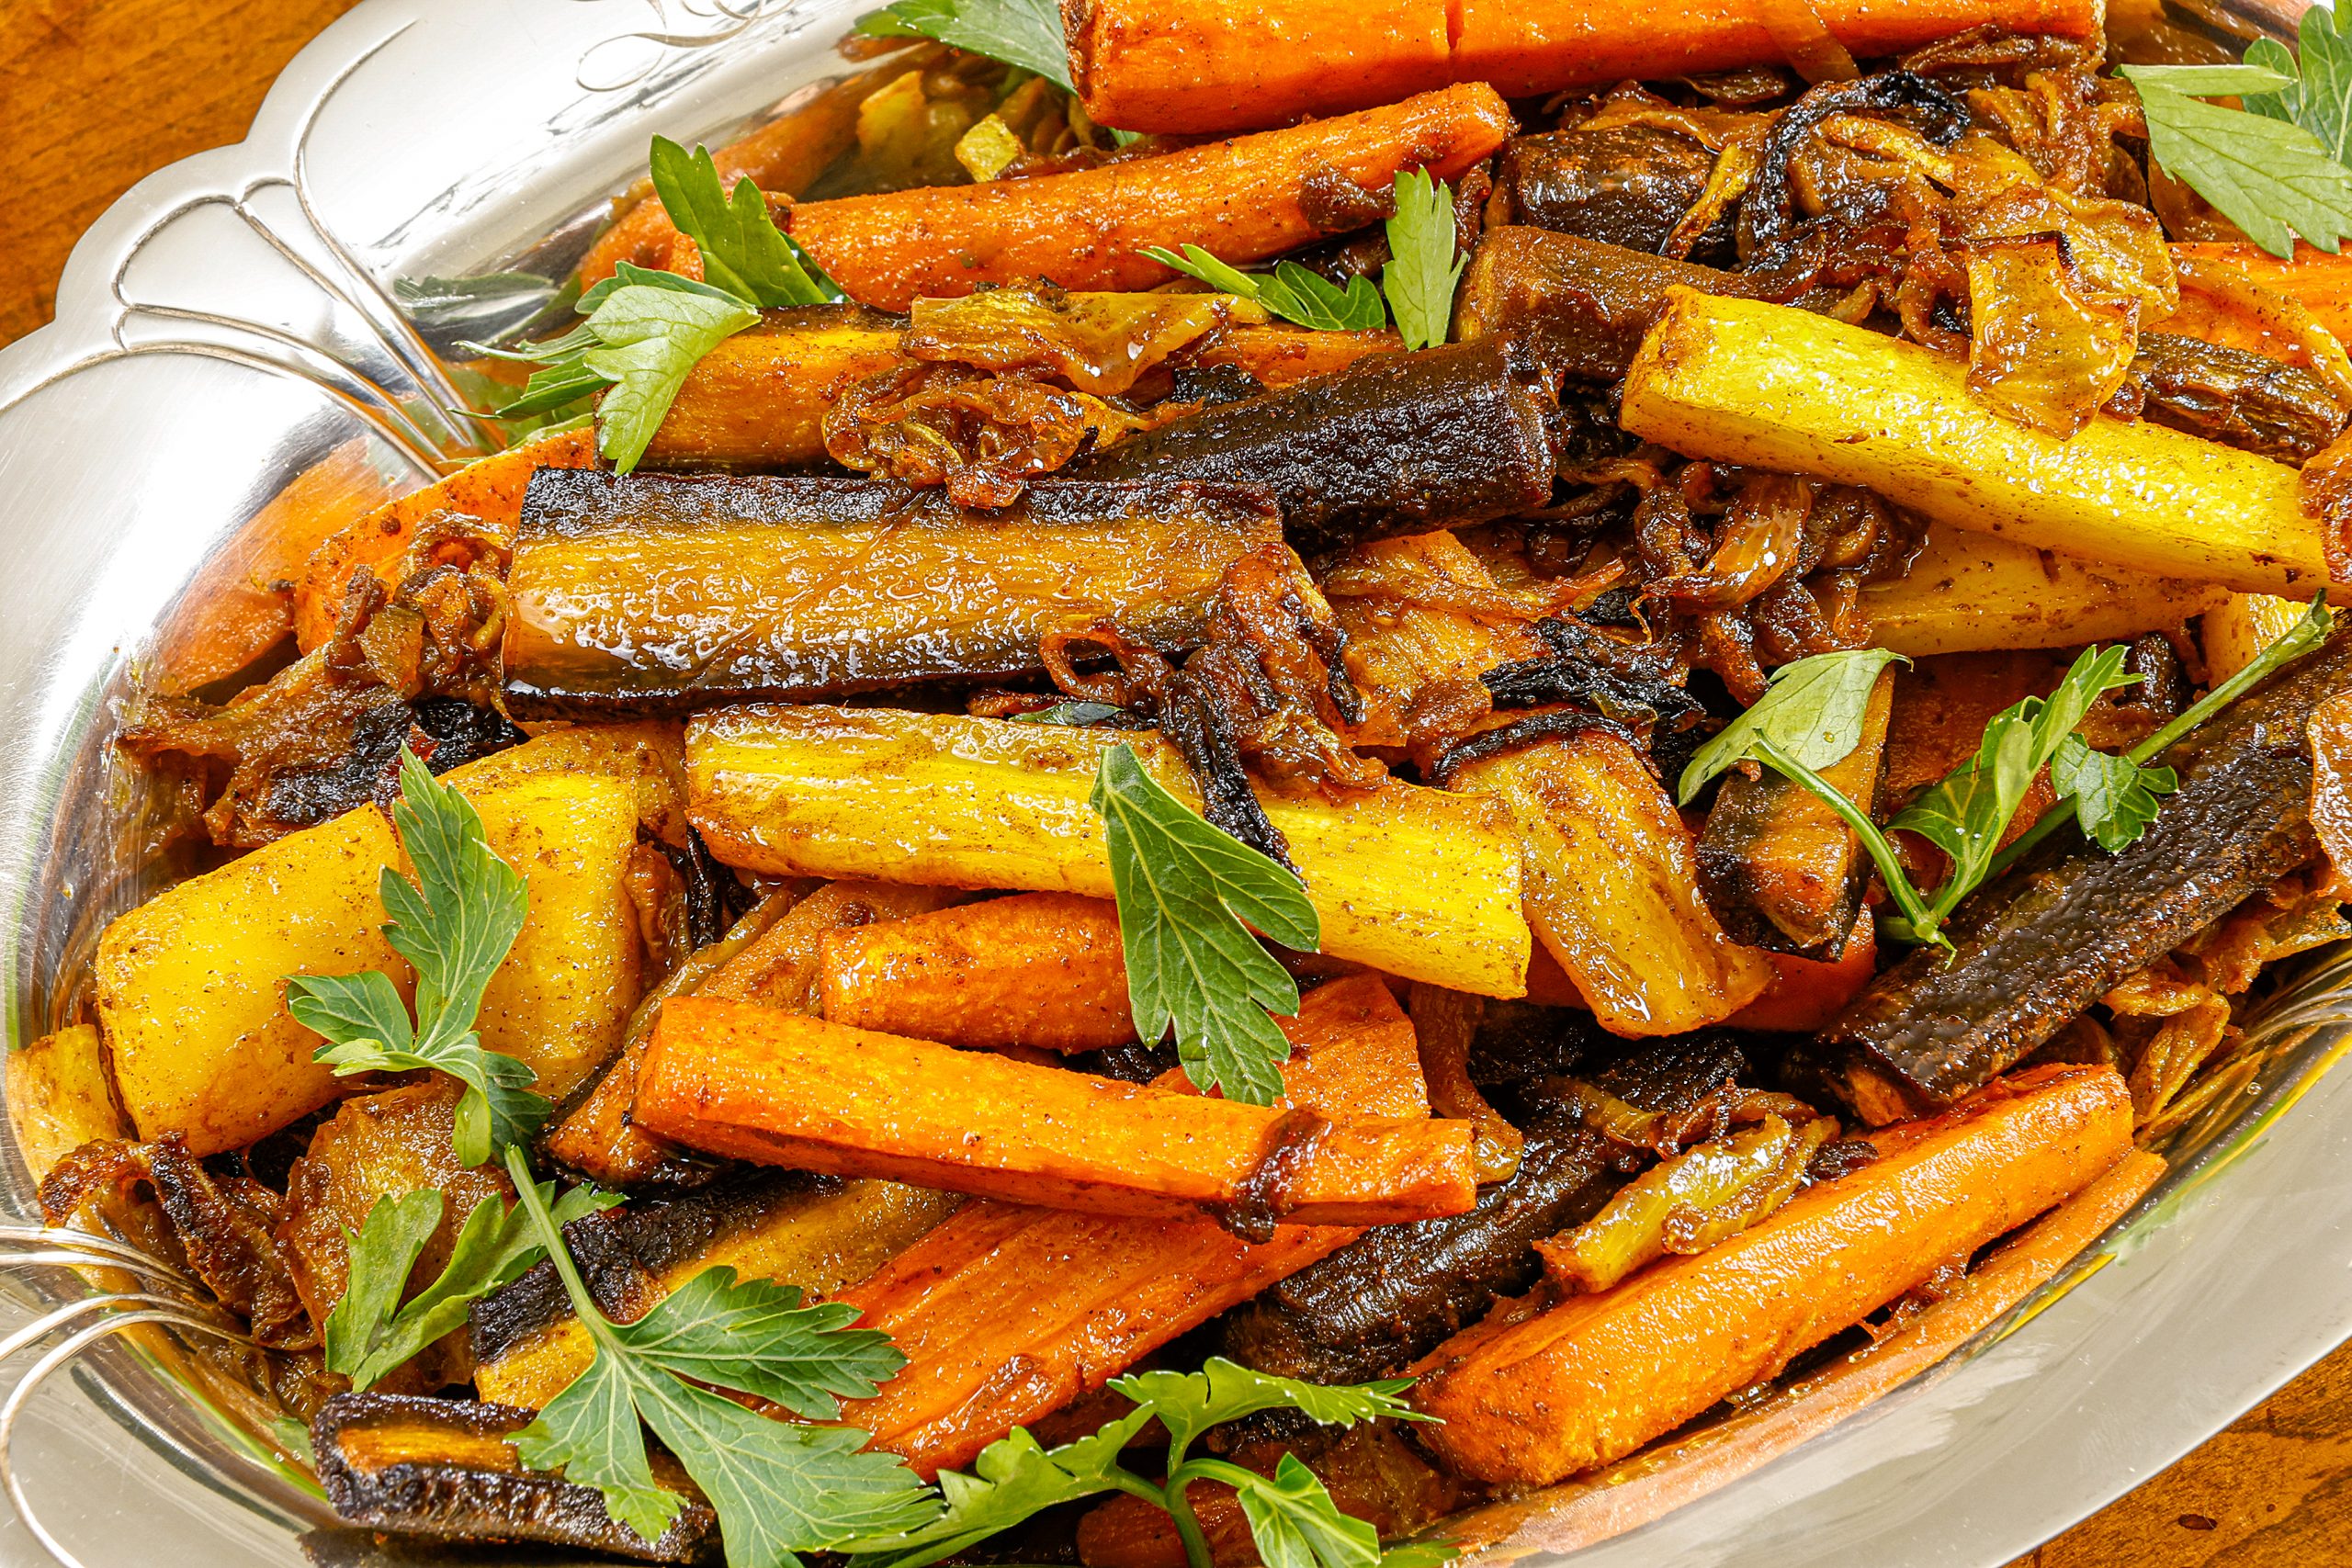 Spice Roasted Carrots may be roasted several hours ahead and served at room temperature.